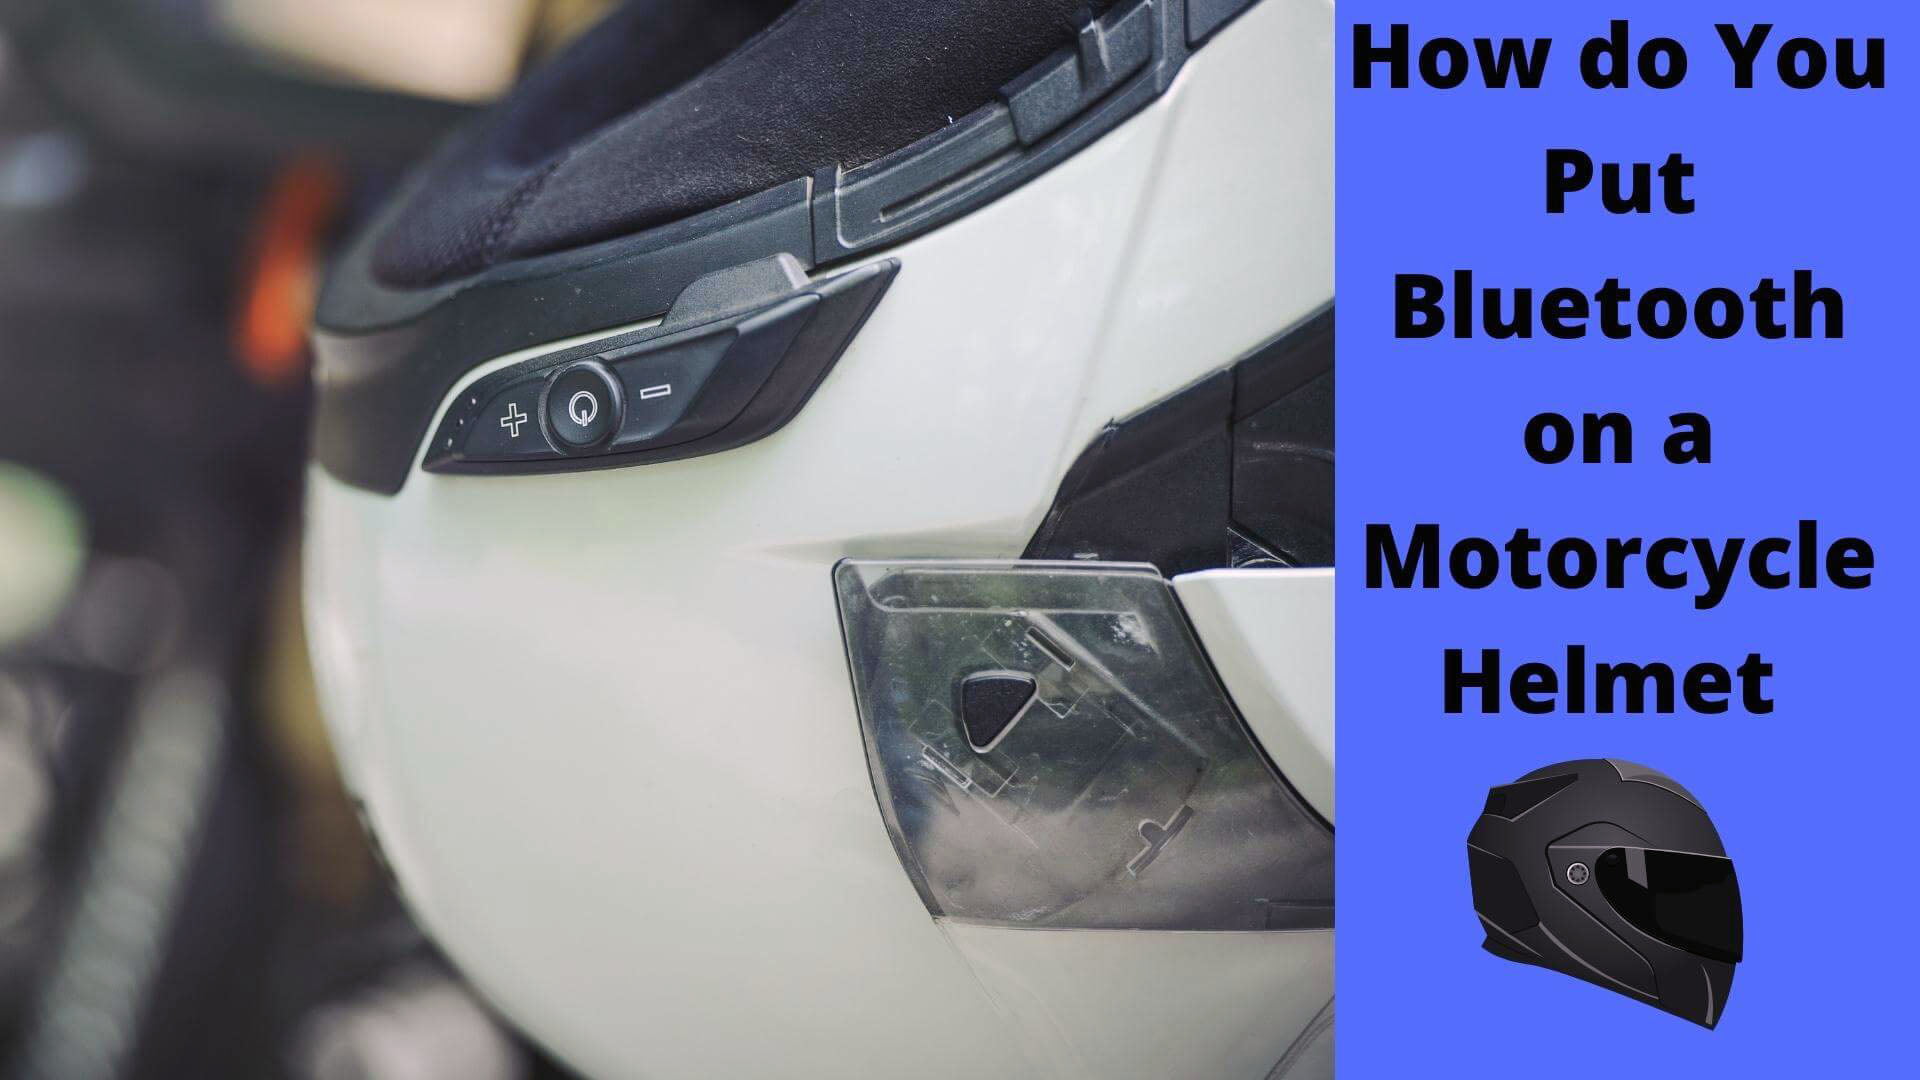 how do you put Bluetooth on a motorcycle helmet